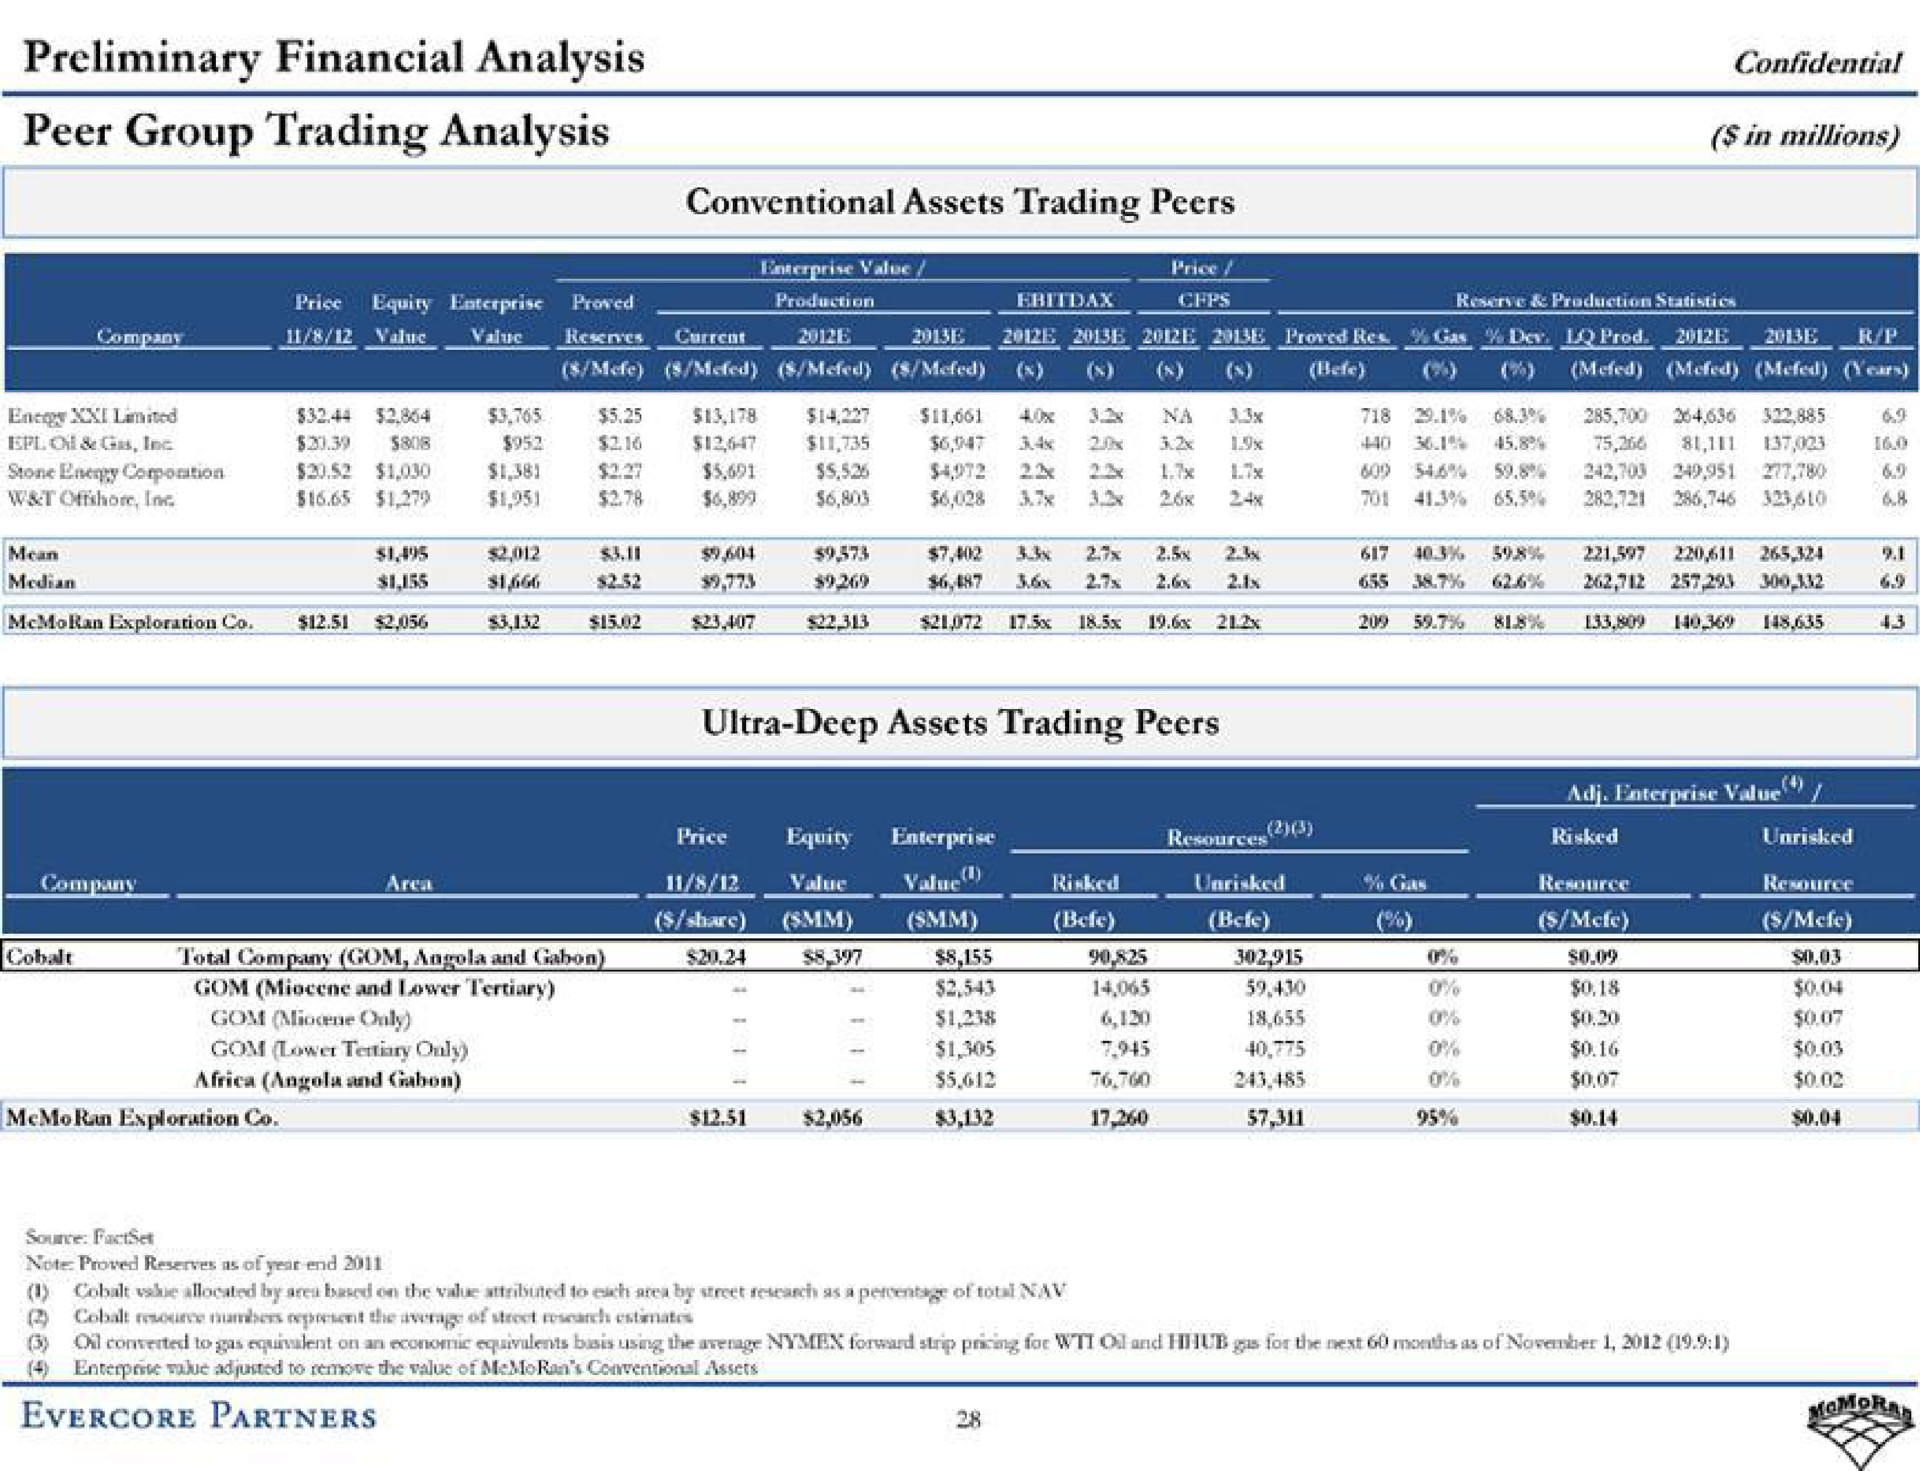 preliminary financial analysis peer group trading analysis confidential in millions conventional assets trading peers | Evercore